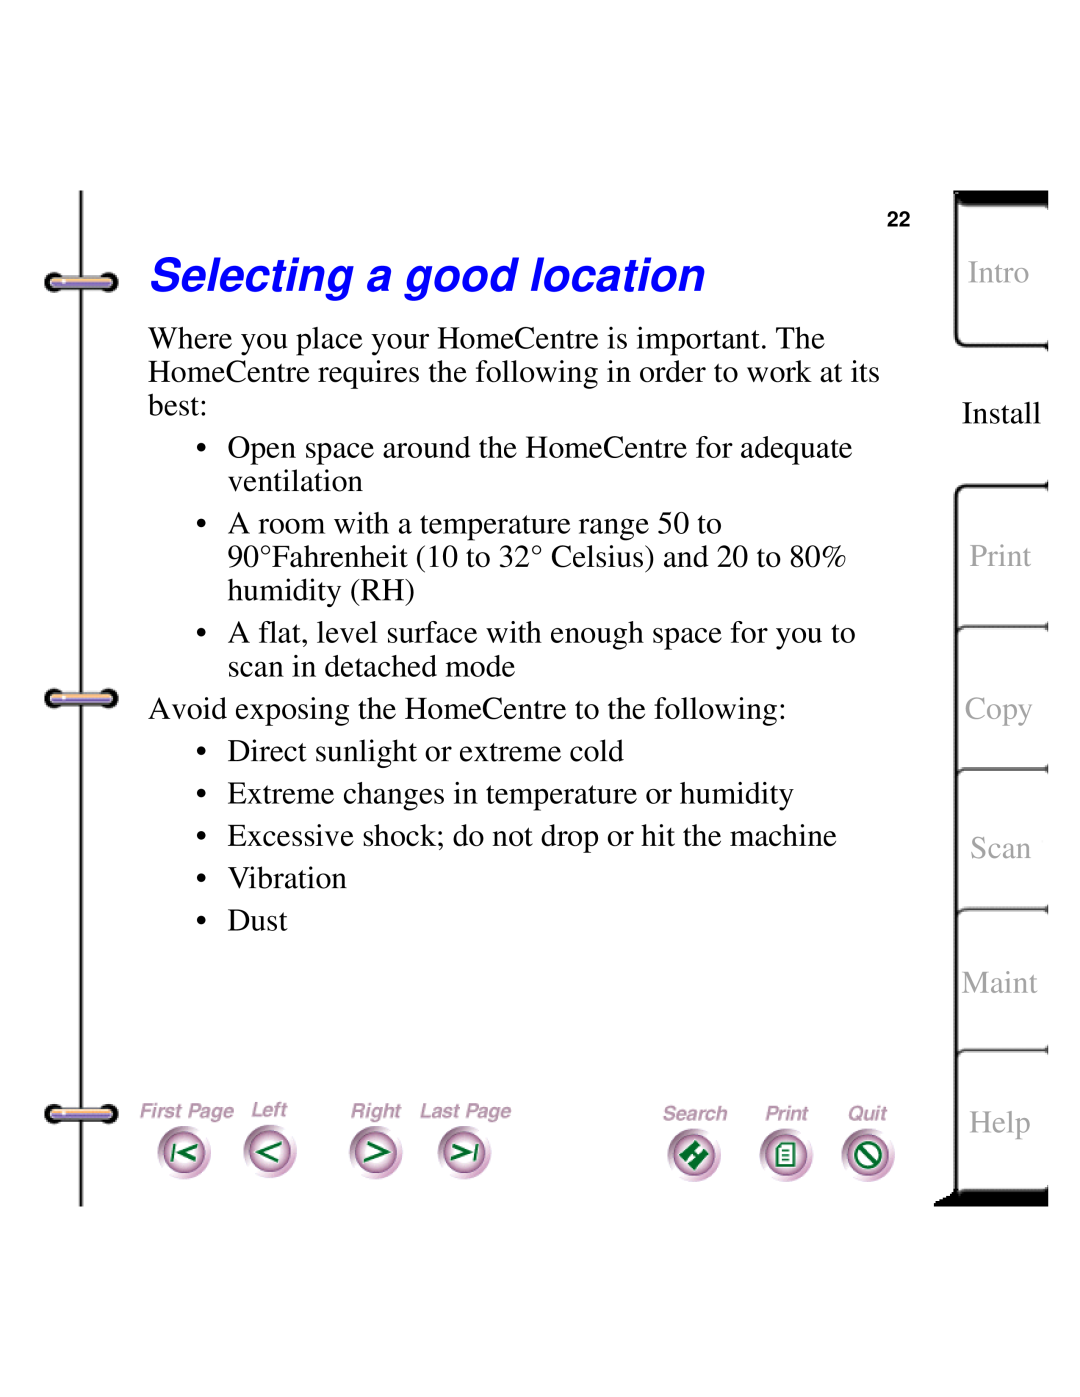 Xerox Document HomeCentre manual Selecting a good location, Intro, Print Copy Scan Maint, Help 